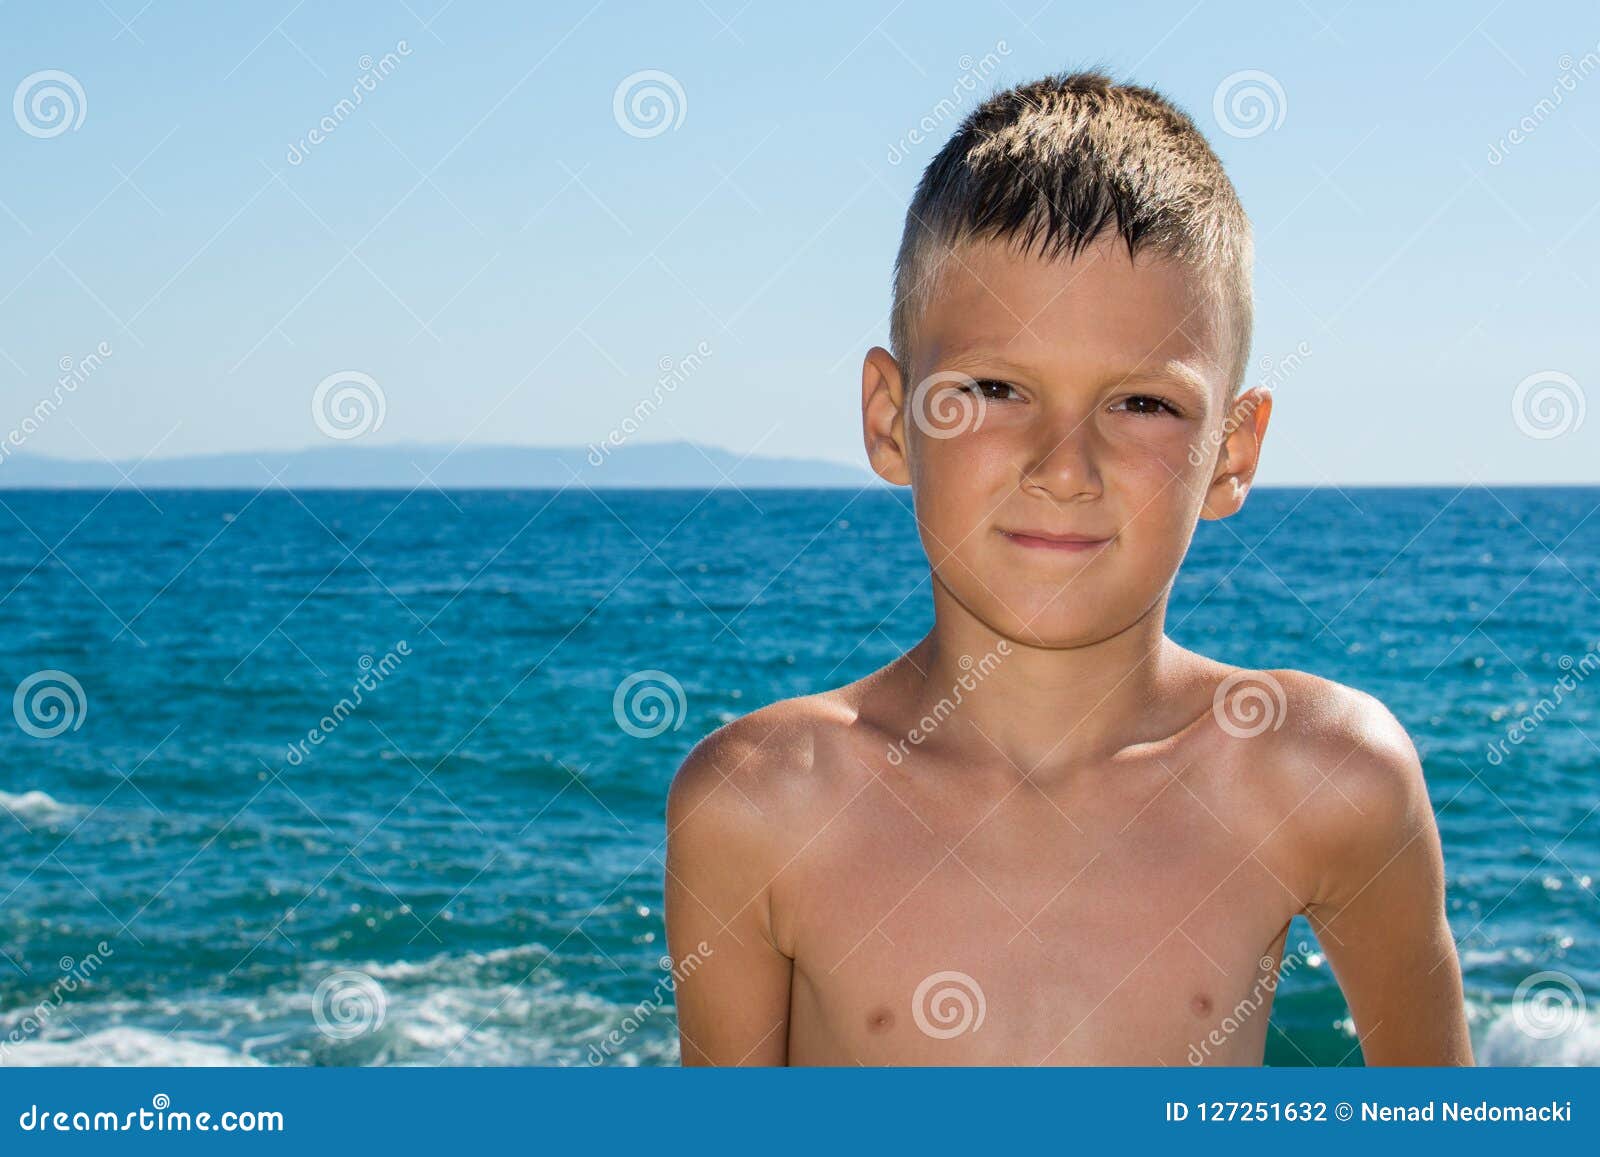 A Beautiful Little Boy Posing on a Beach by the Sea Stock Photo - Image ...